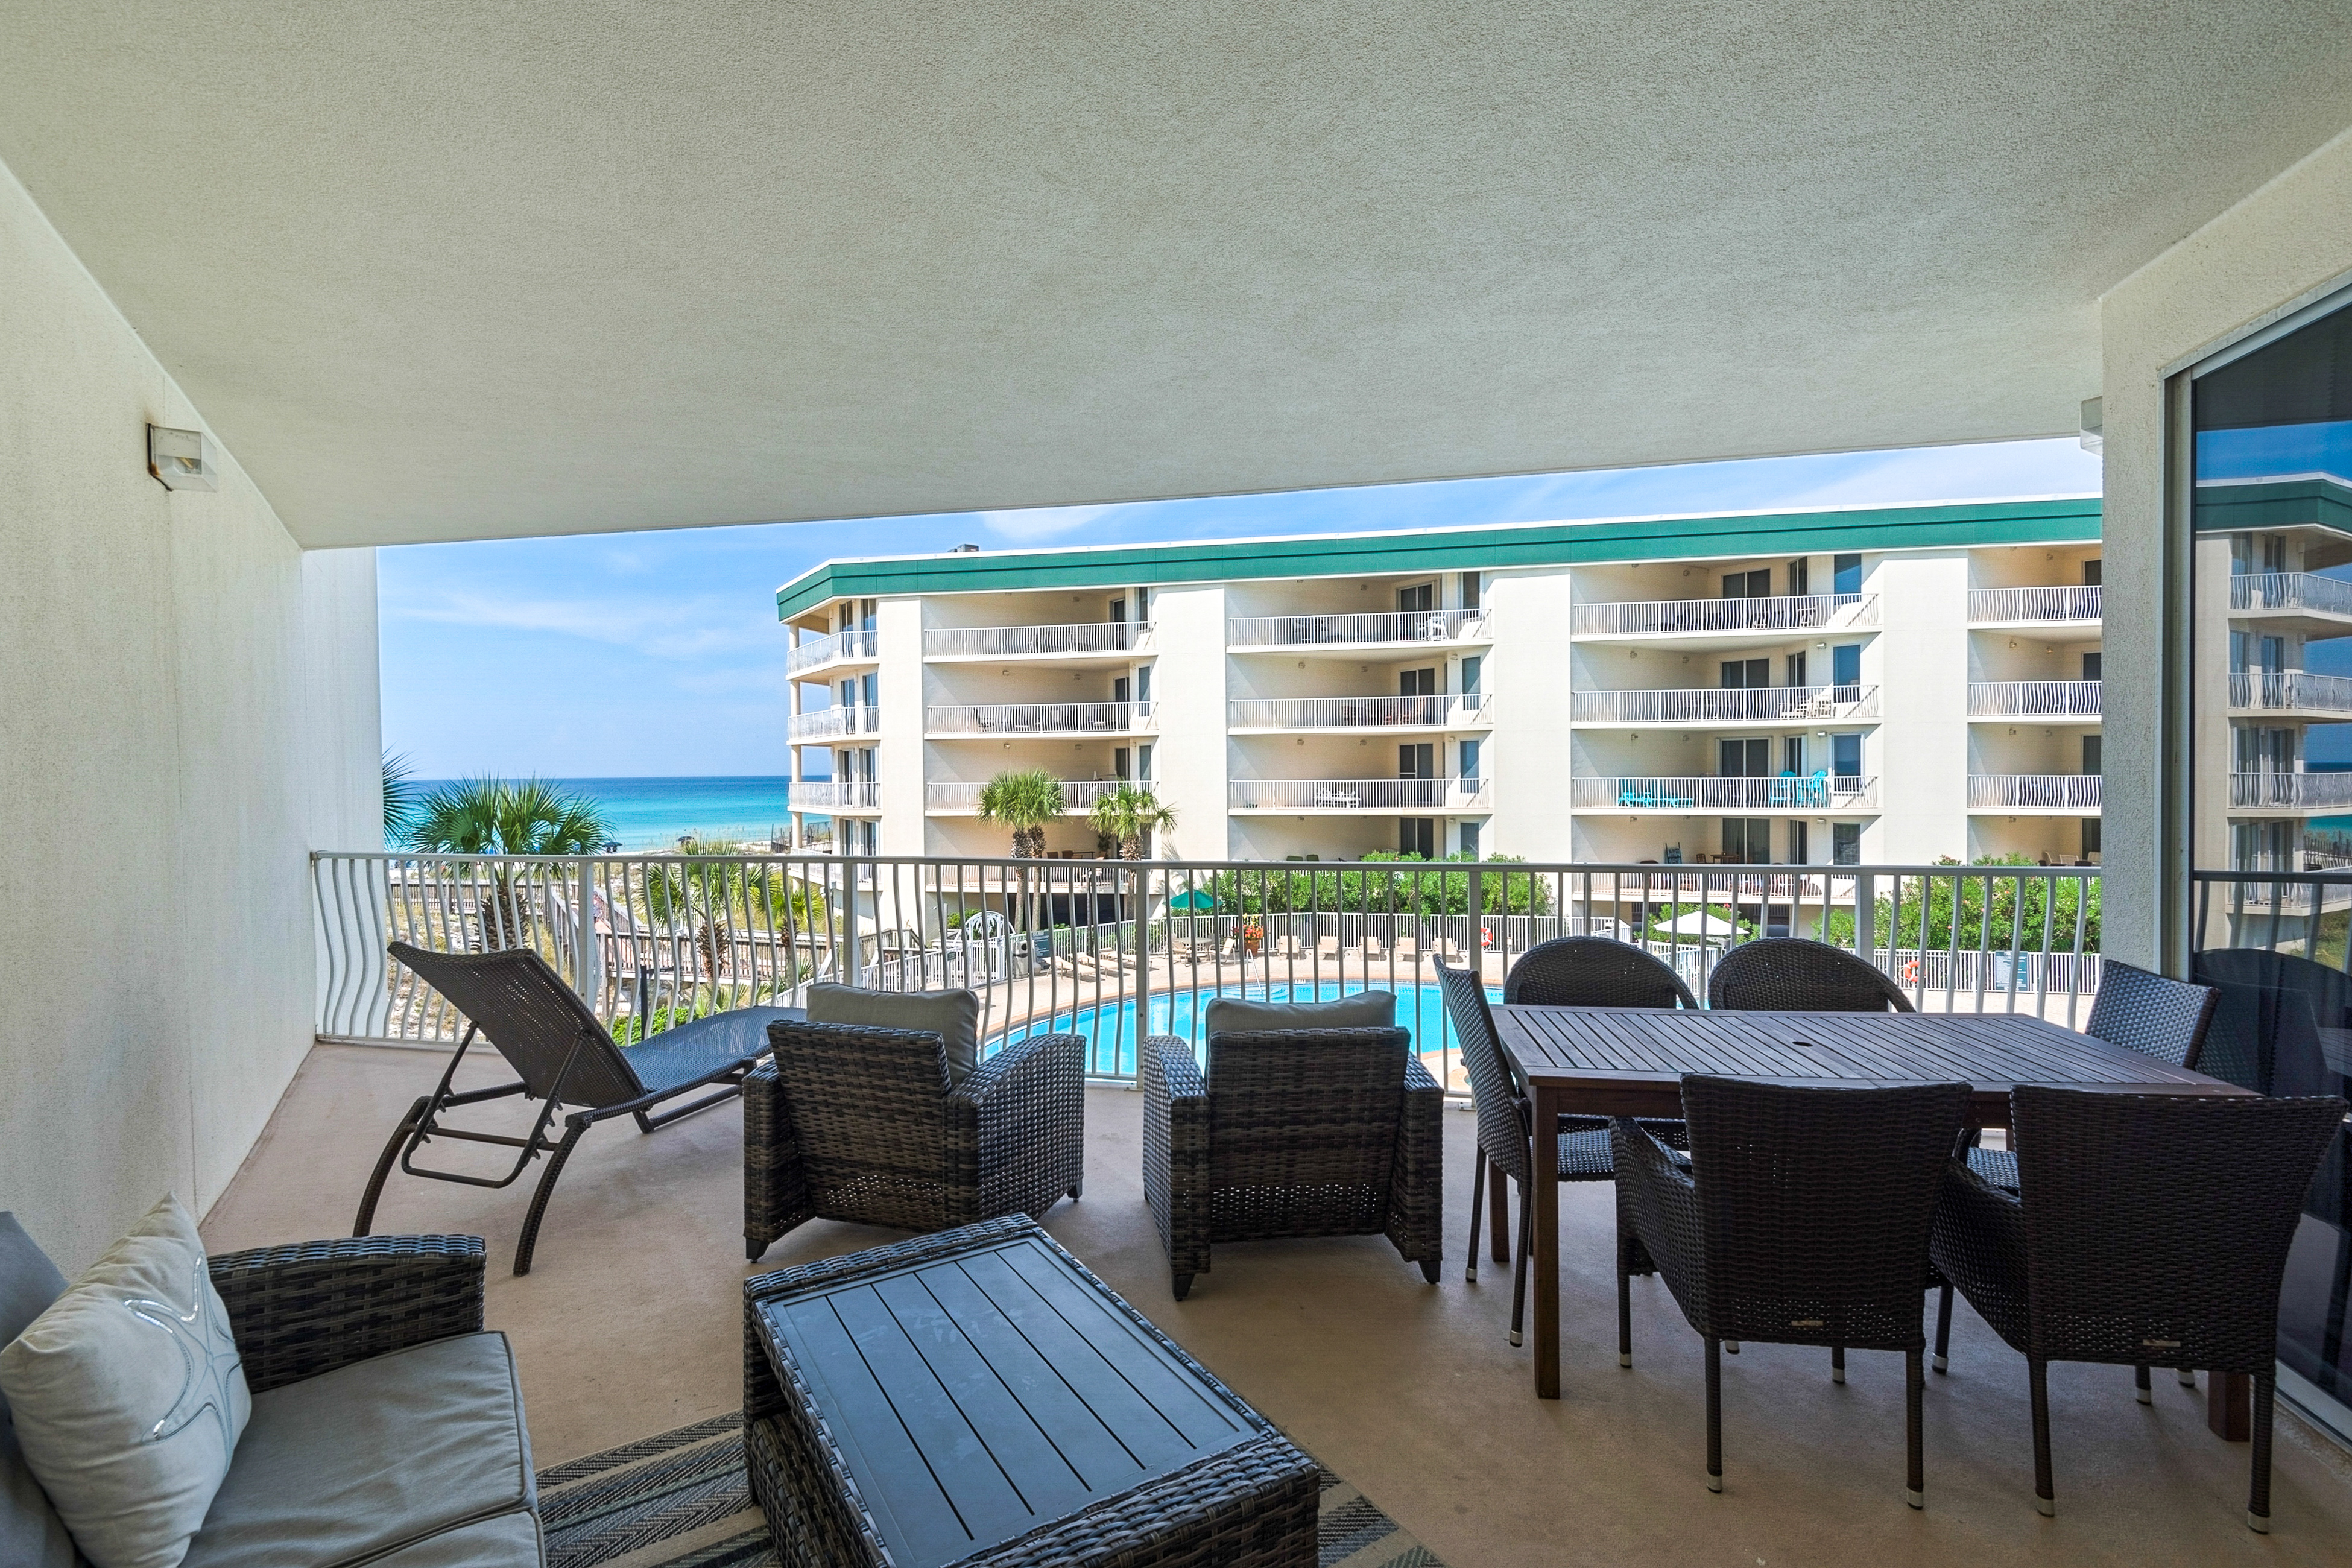 Dunes of Seagrove A206 Condo rental in Dunes of Seagrove in Highway 30-A Florida - #8